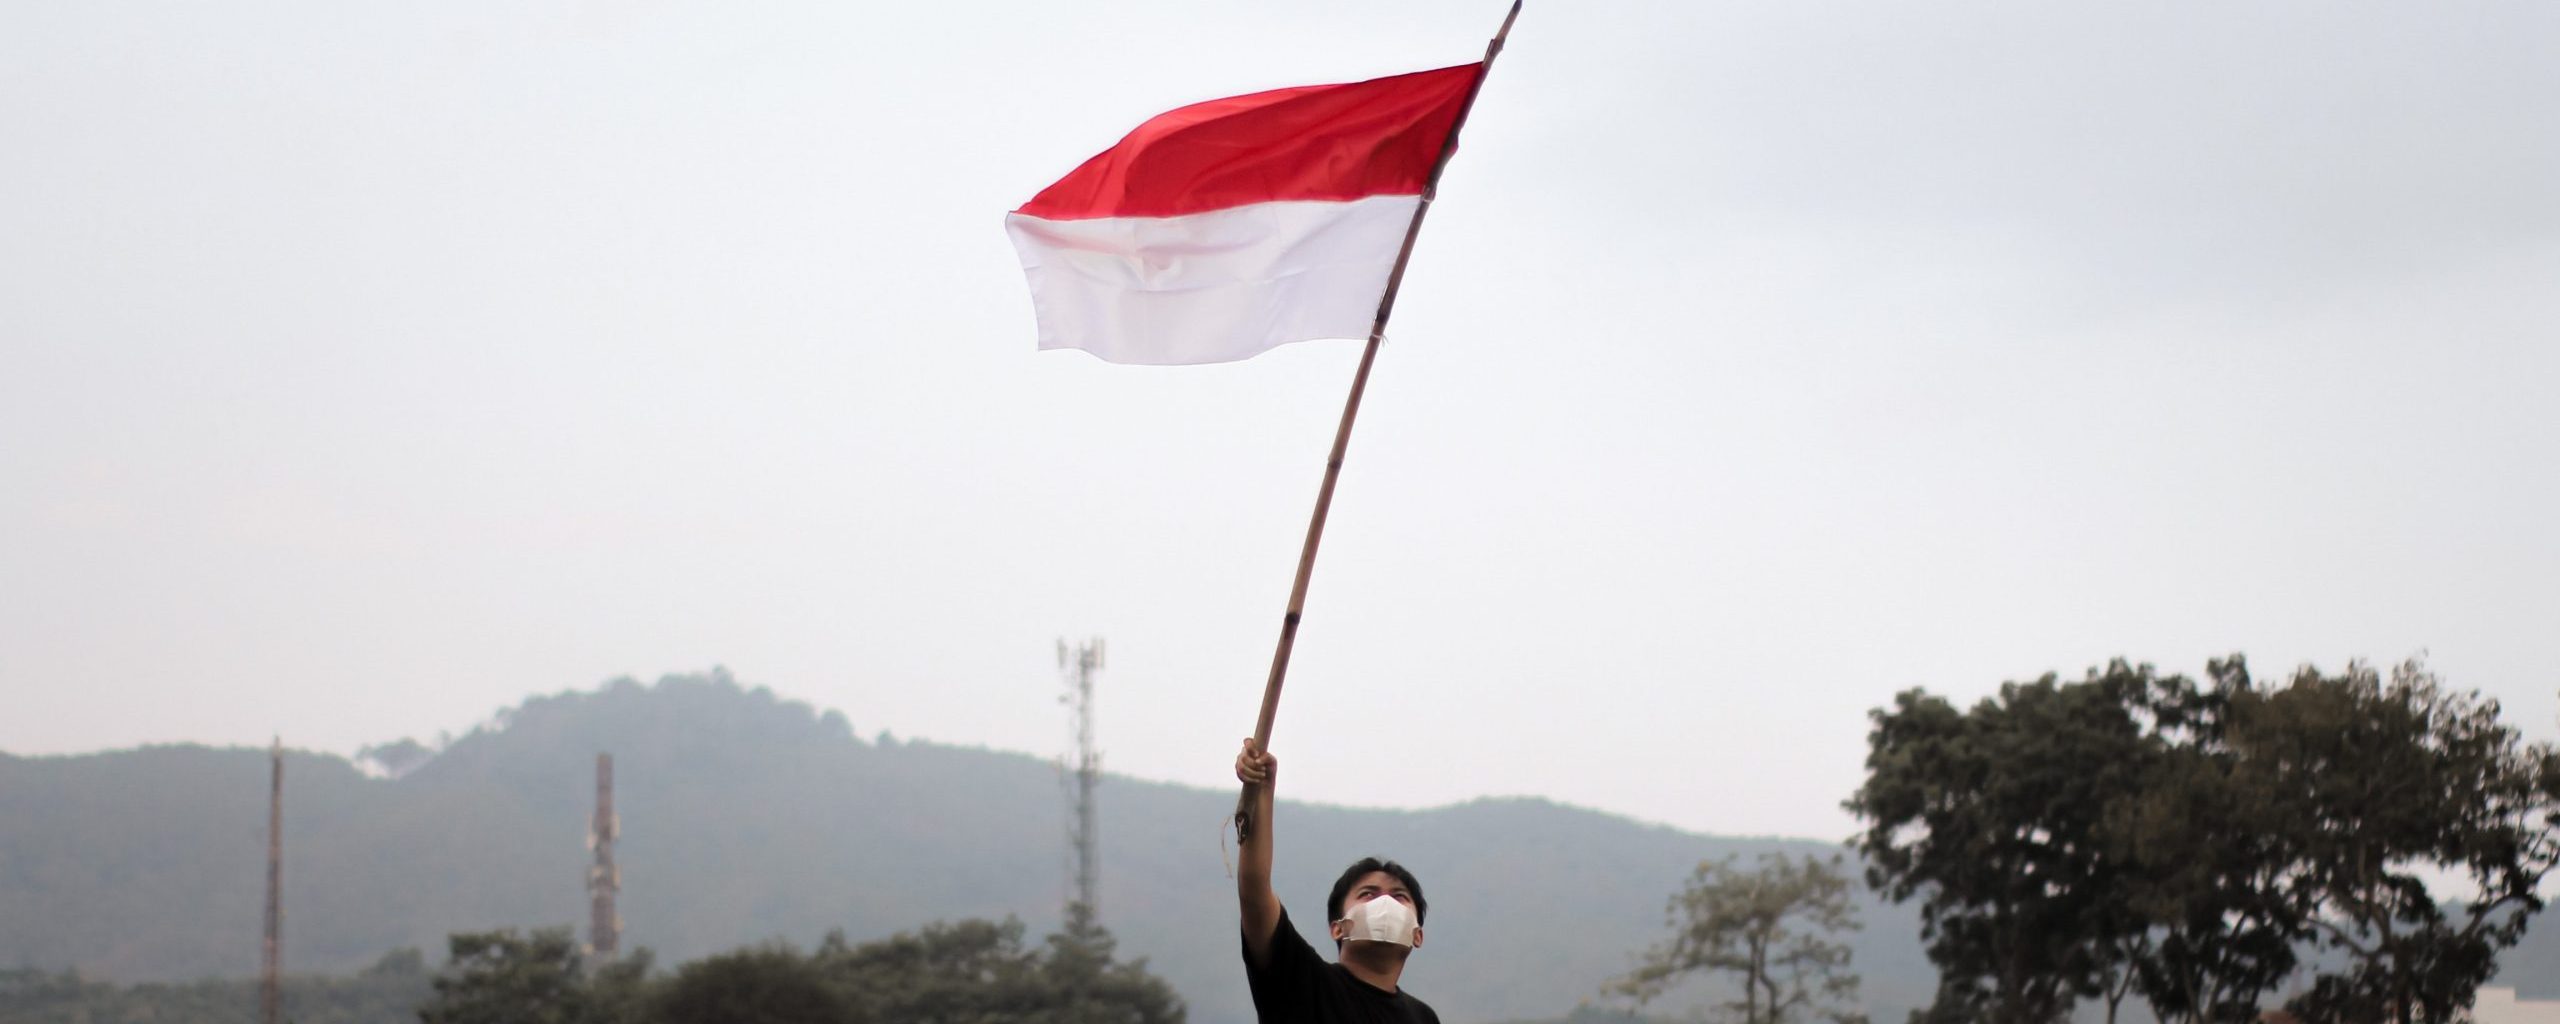 Universal Periodic Review of Indonesia